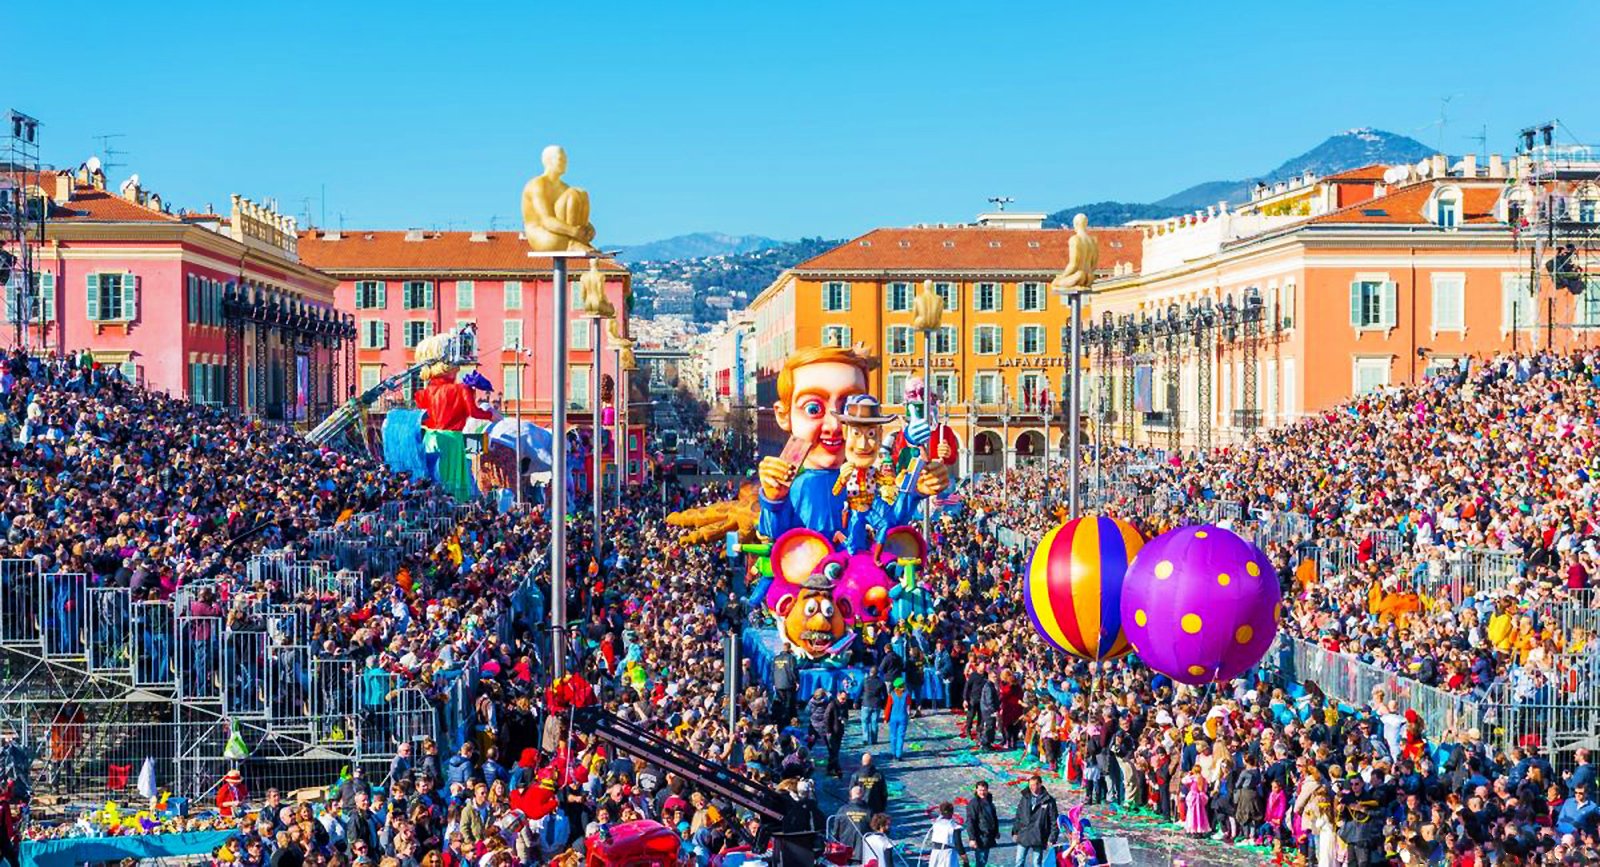 How to participate in the Carnival in Nice